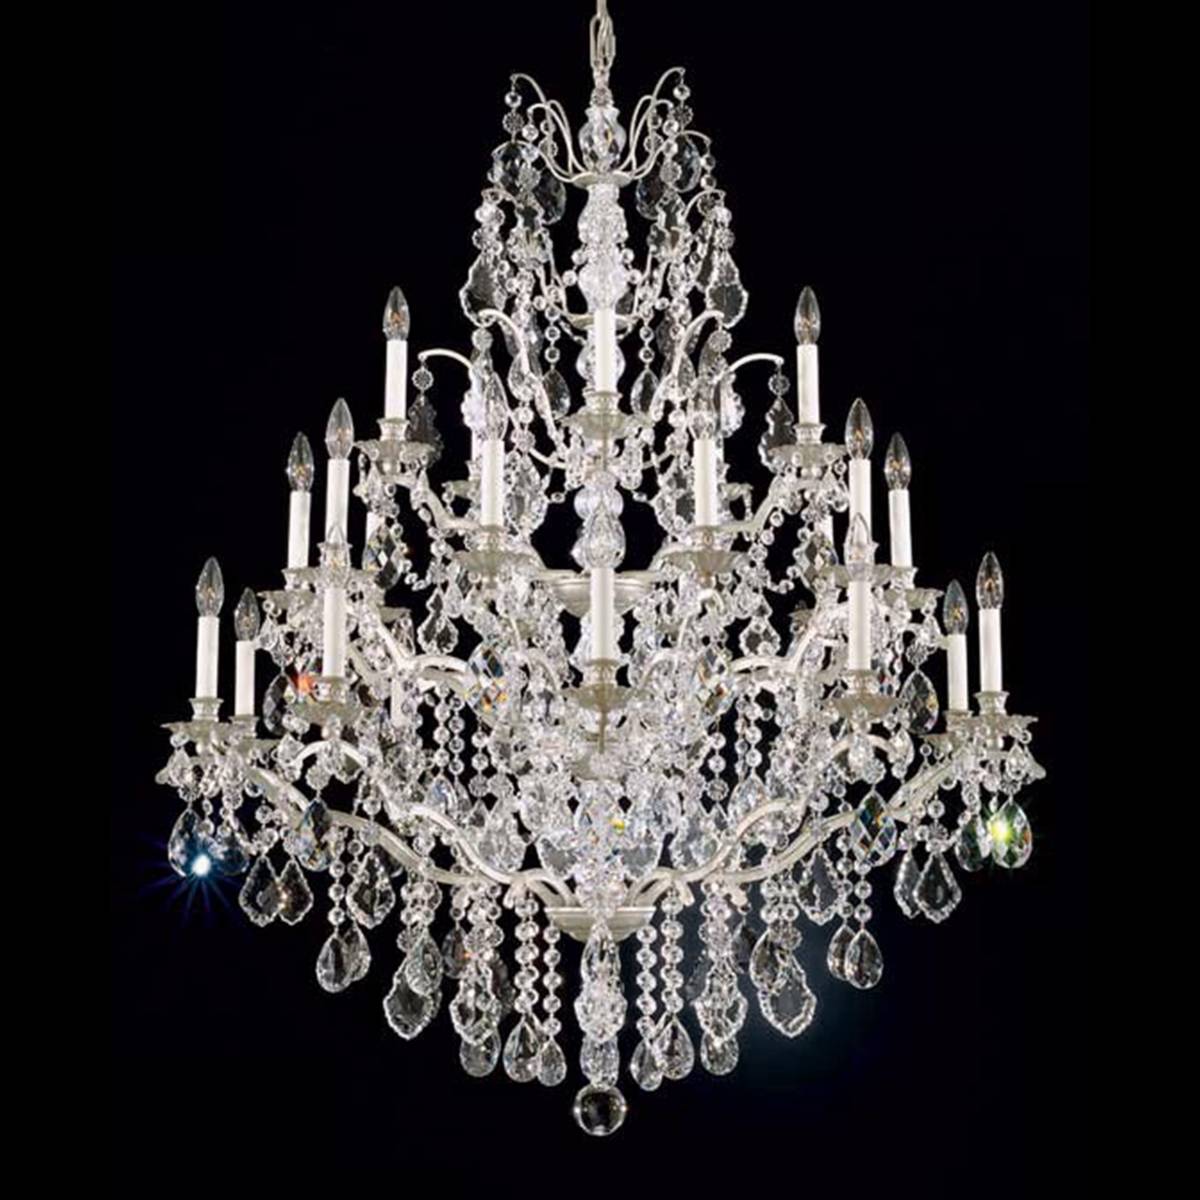 Entry Chandeliers - Upscale Entryway Chandelier Designs - Page 7 ...